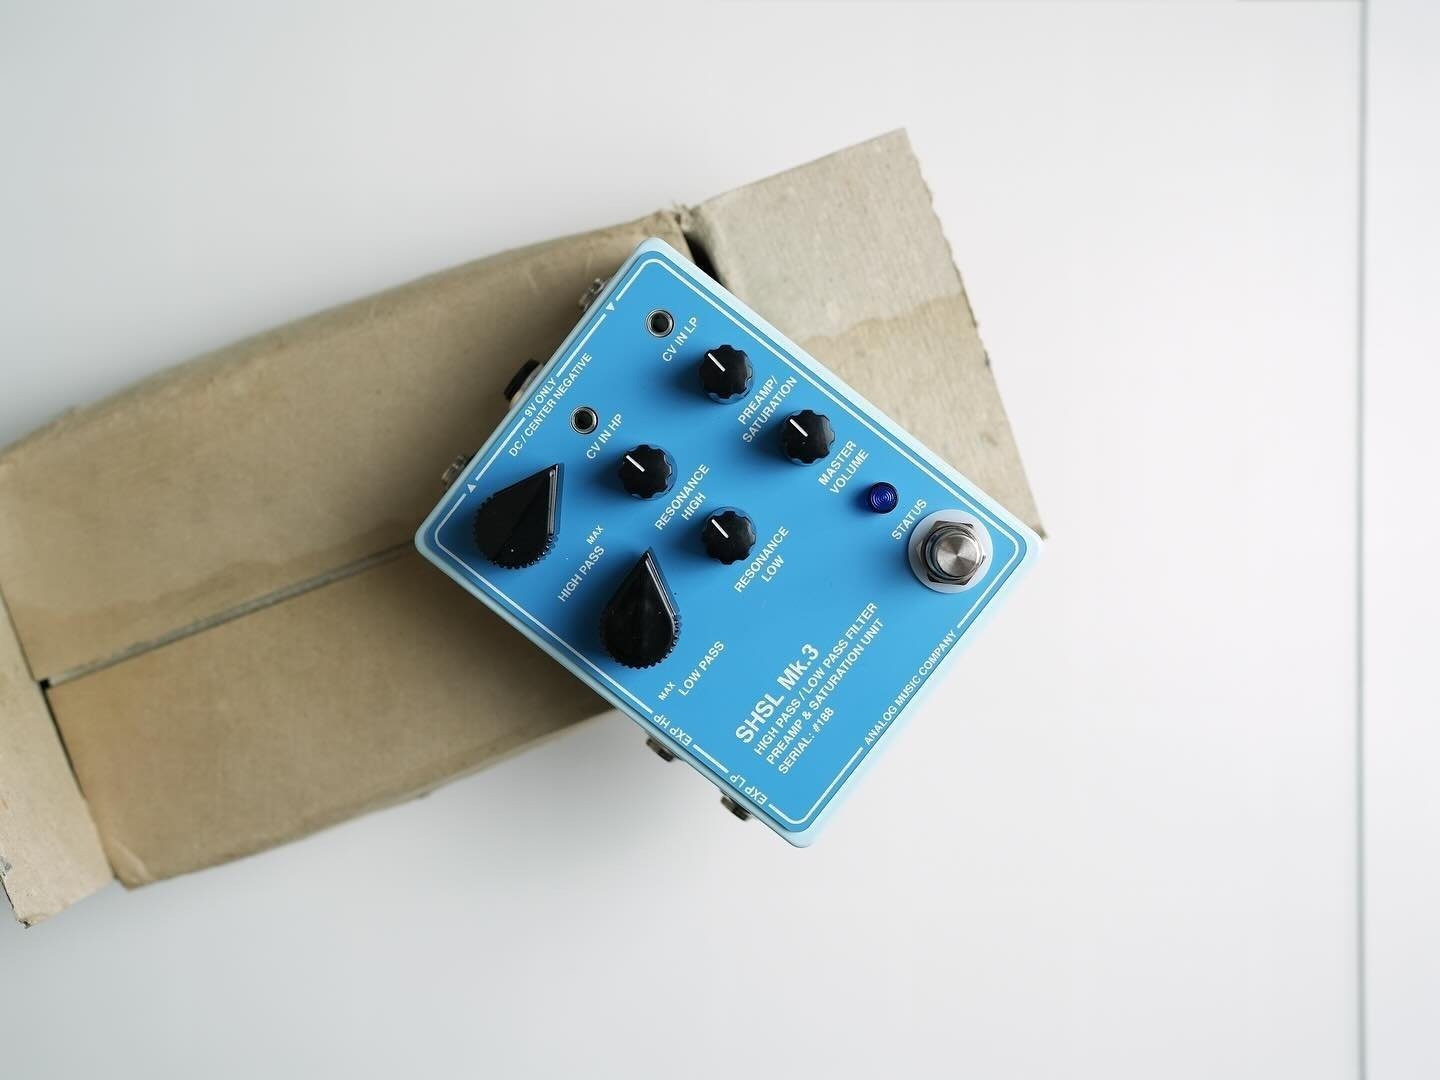 EXCLUSIVE BLUE ON BLUE SHSL FILTER/PREAMP PEDALS SHIPPED TO LITTLE BOX EFFECTS IN THE USA.